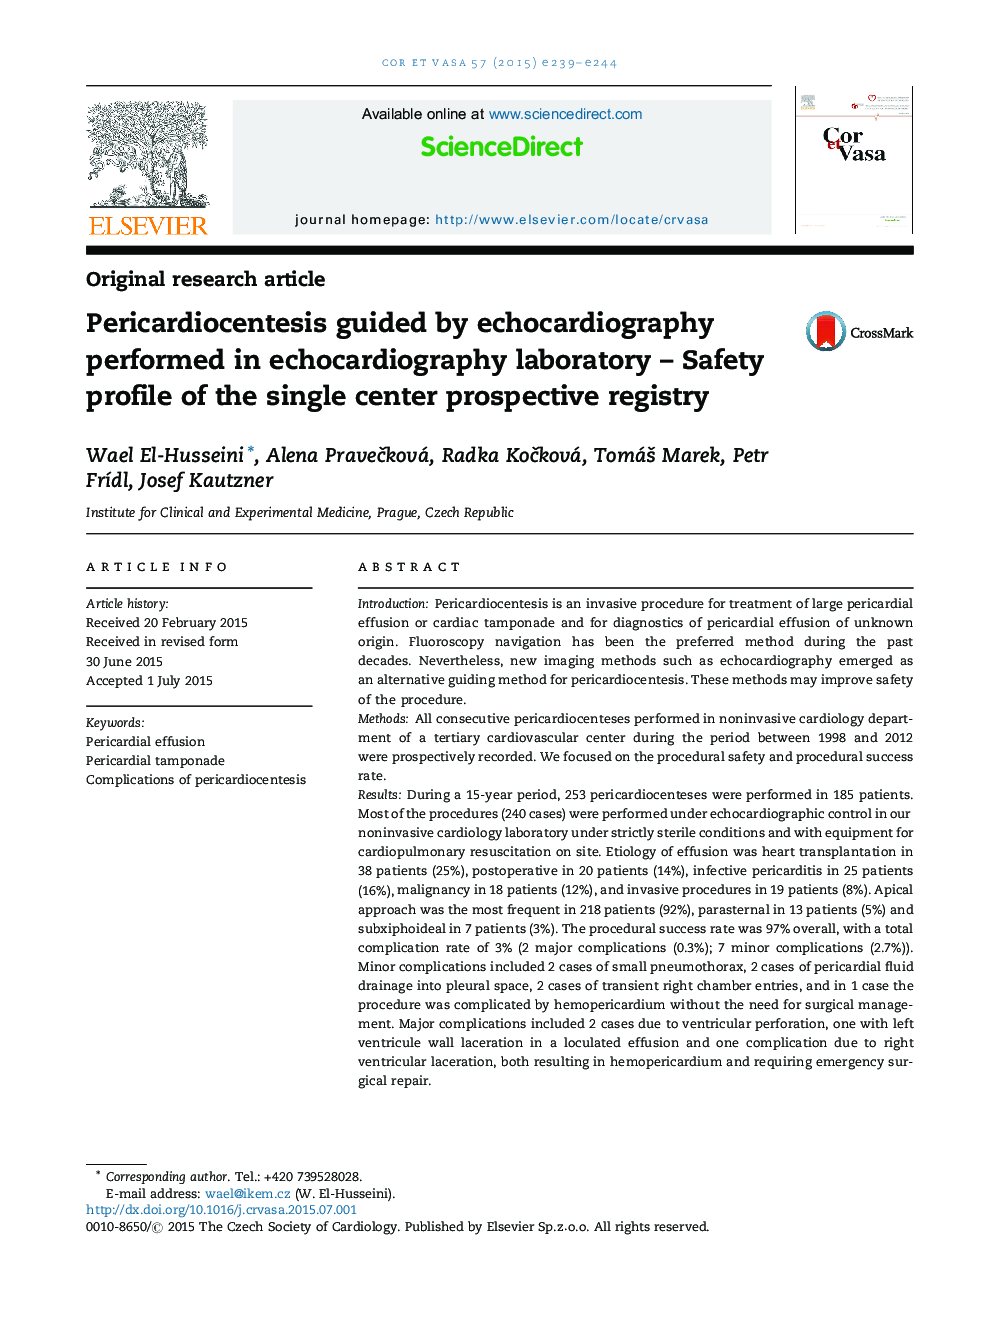 Pericardiocentesis guided by echocardiography performed in echocardiography laboratory – Safety profile of the single center prospective registry